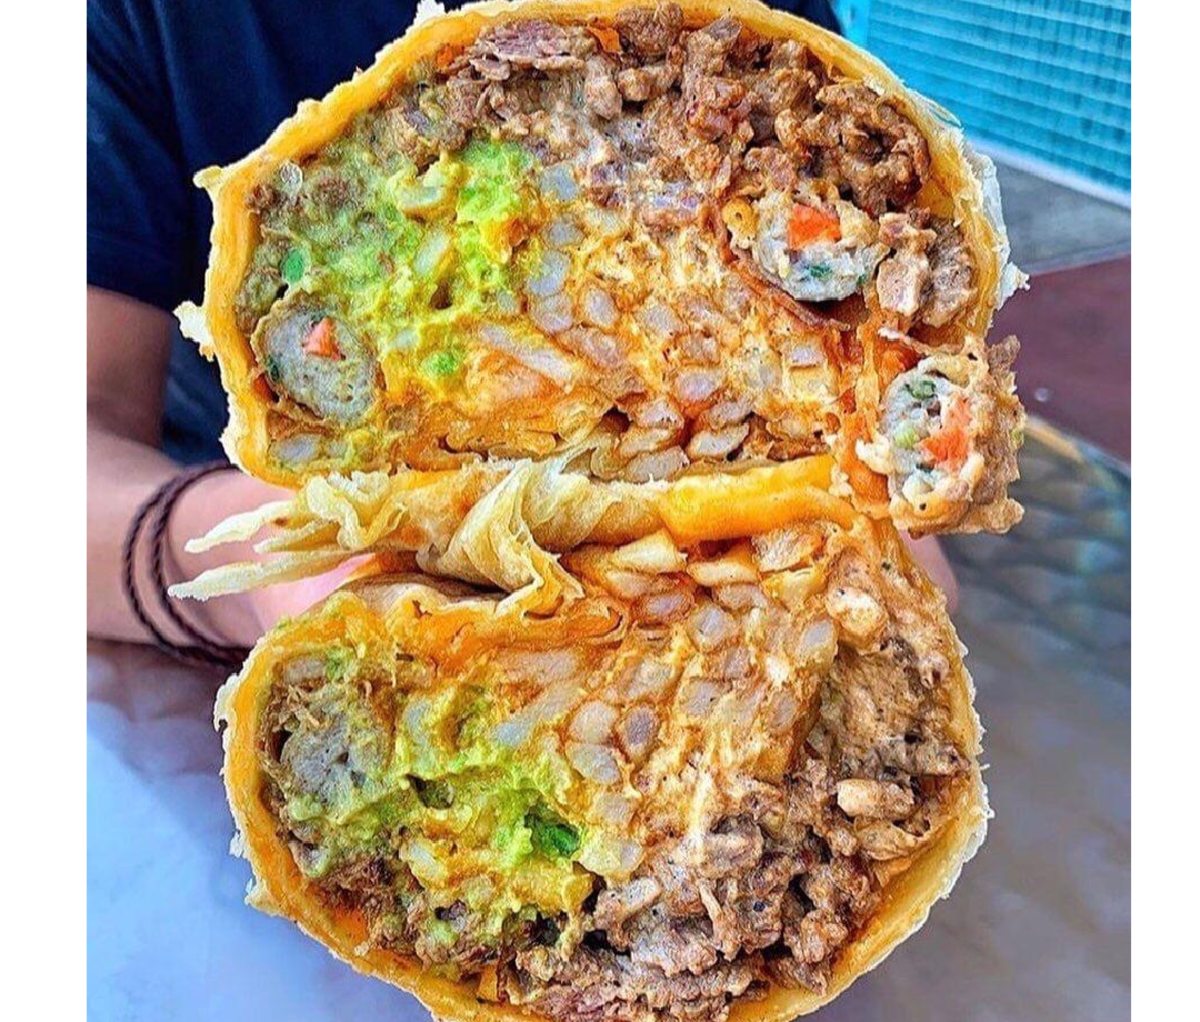 Two stacked halves of a burrito held at Sayulitas Mexican Food